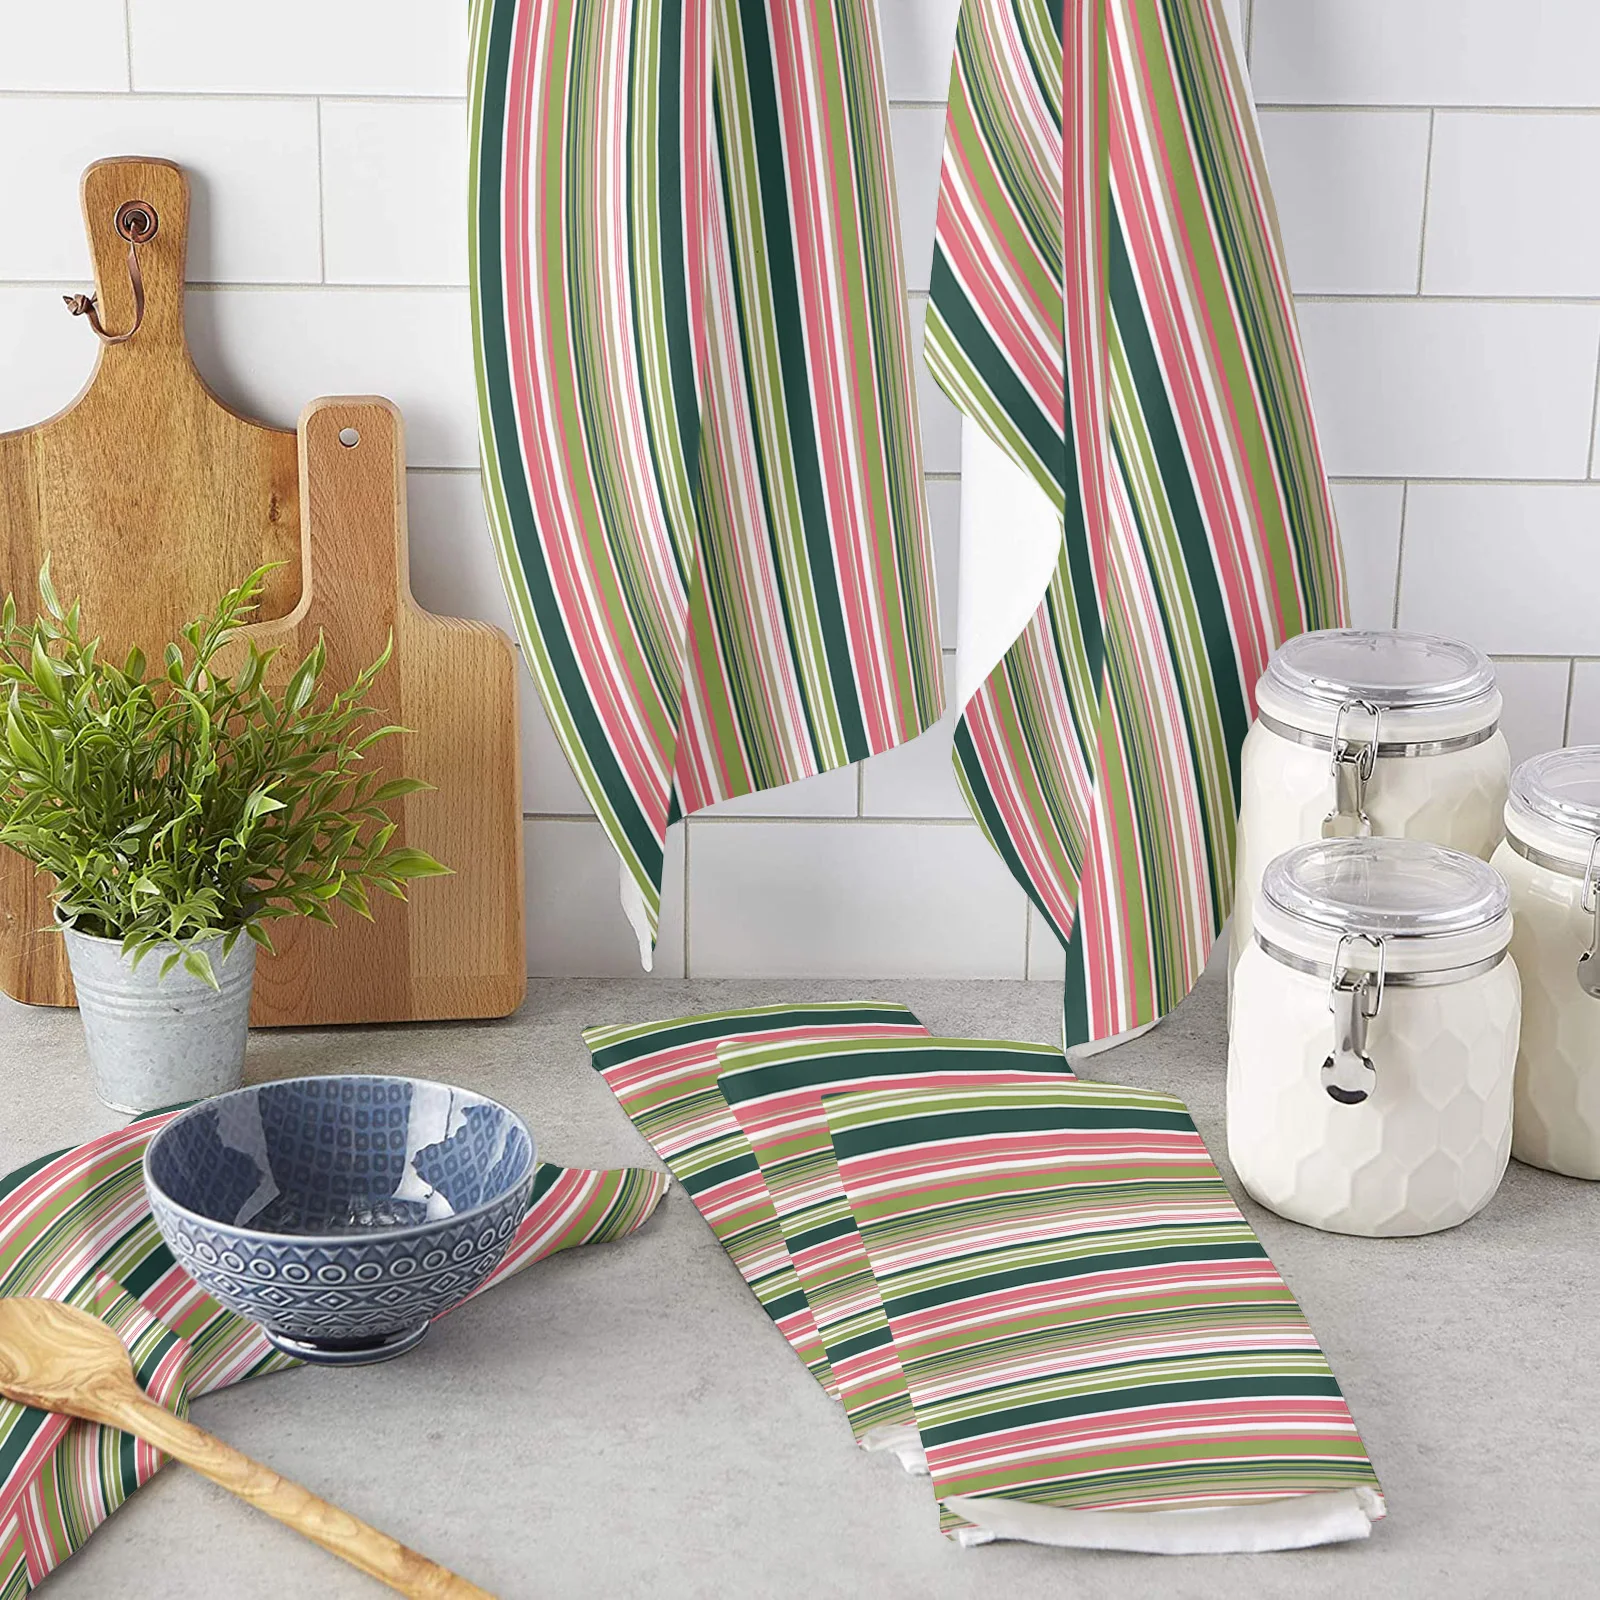 https://ae01.alicdn.com/kf/Sf3701e1c43944742a4310d441cda973eY/Colorful-Striped-Texture-Kitchen-Towel-Absorbent-Dish-Cloth-Tableware-Towel-for-Kitchen-Household-Cleaning-Tool.jpg